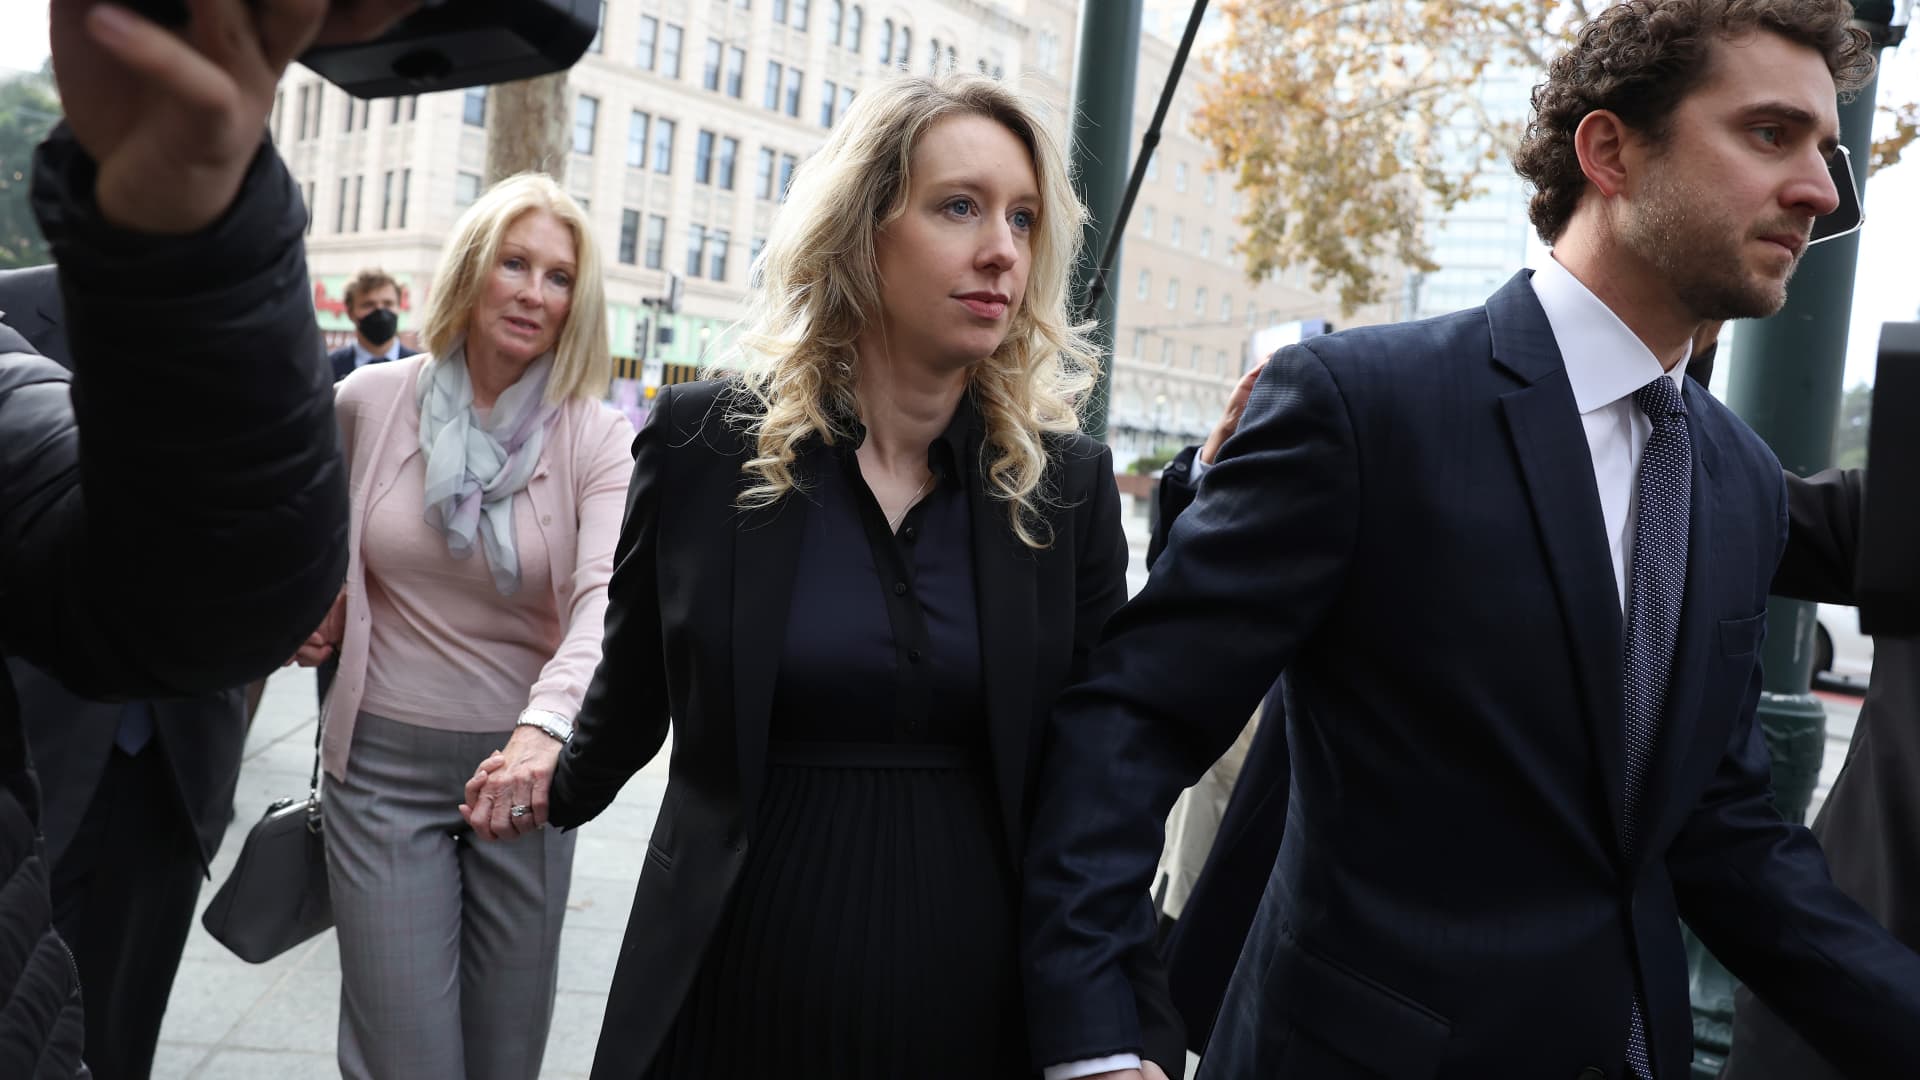 Theranos founder Elizabeth Holmes sentenced to over 11 years in prison